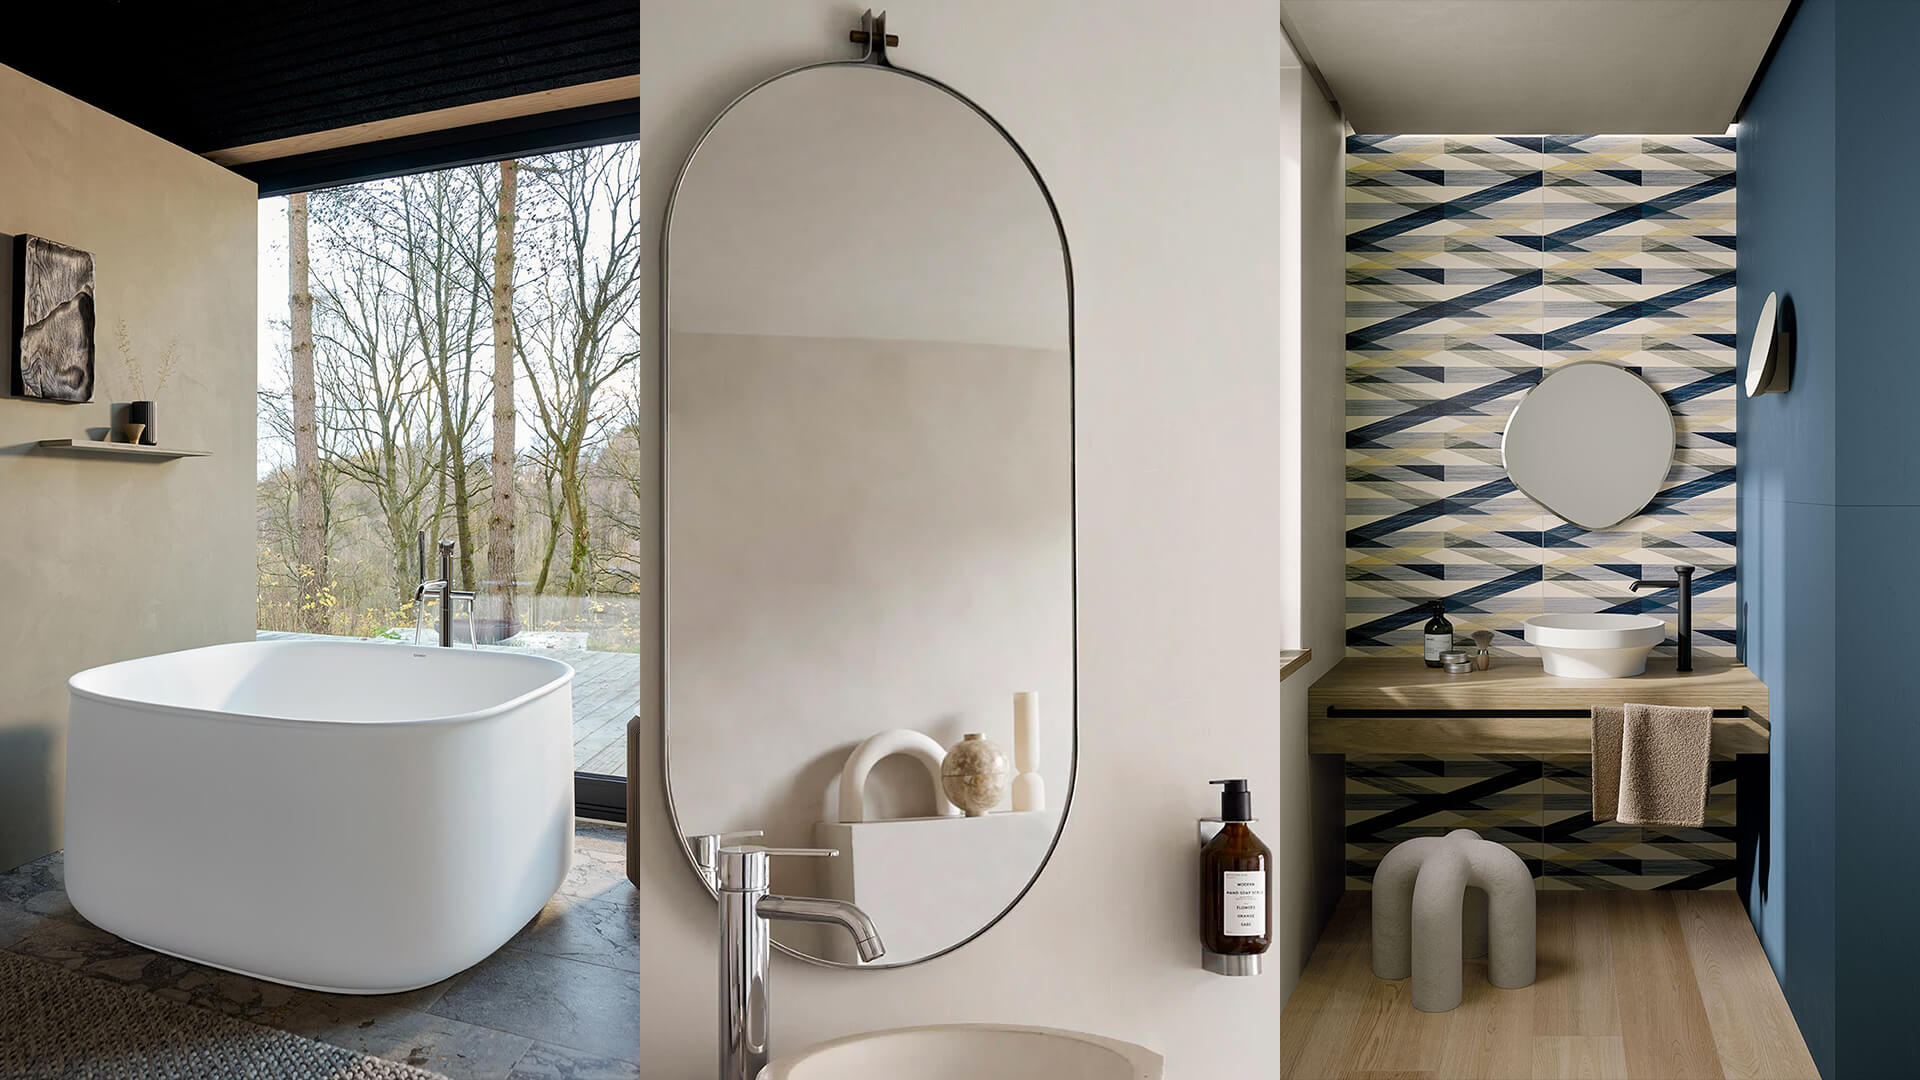 Modish Fare Præferencebehandling Monolithic basins to sculptural mirrors: 10 bathroom accessories that pack  a punch | Anushka Sharma News | STIRpad